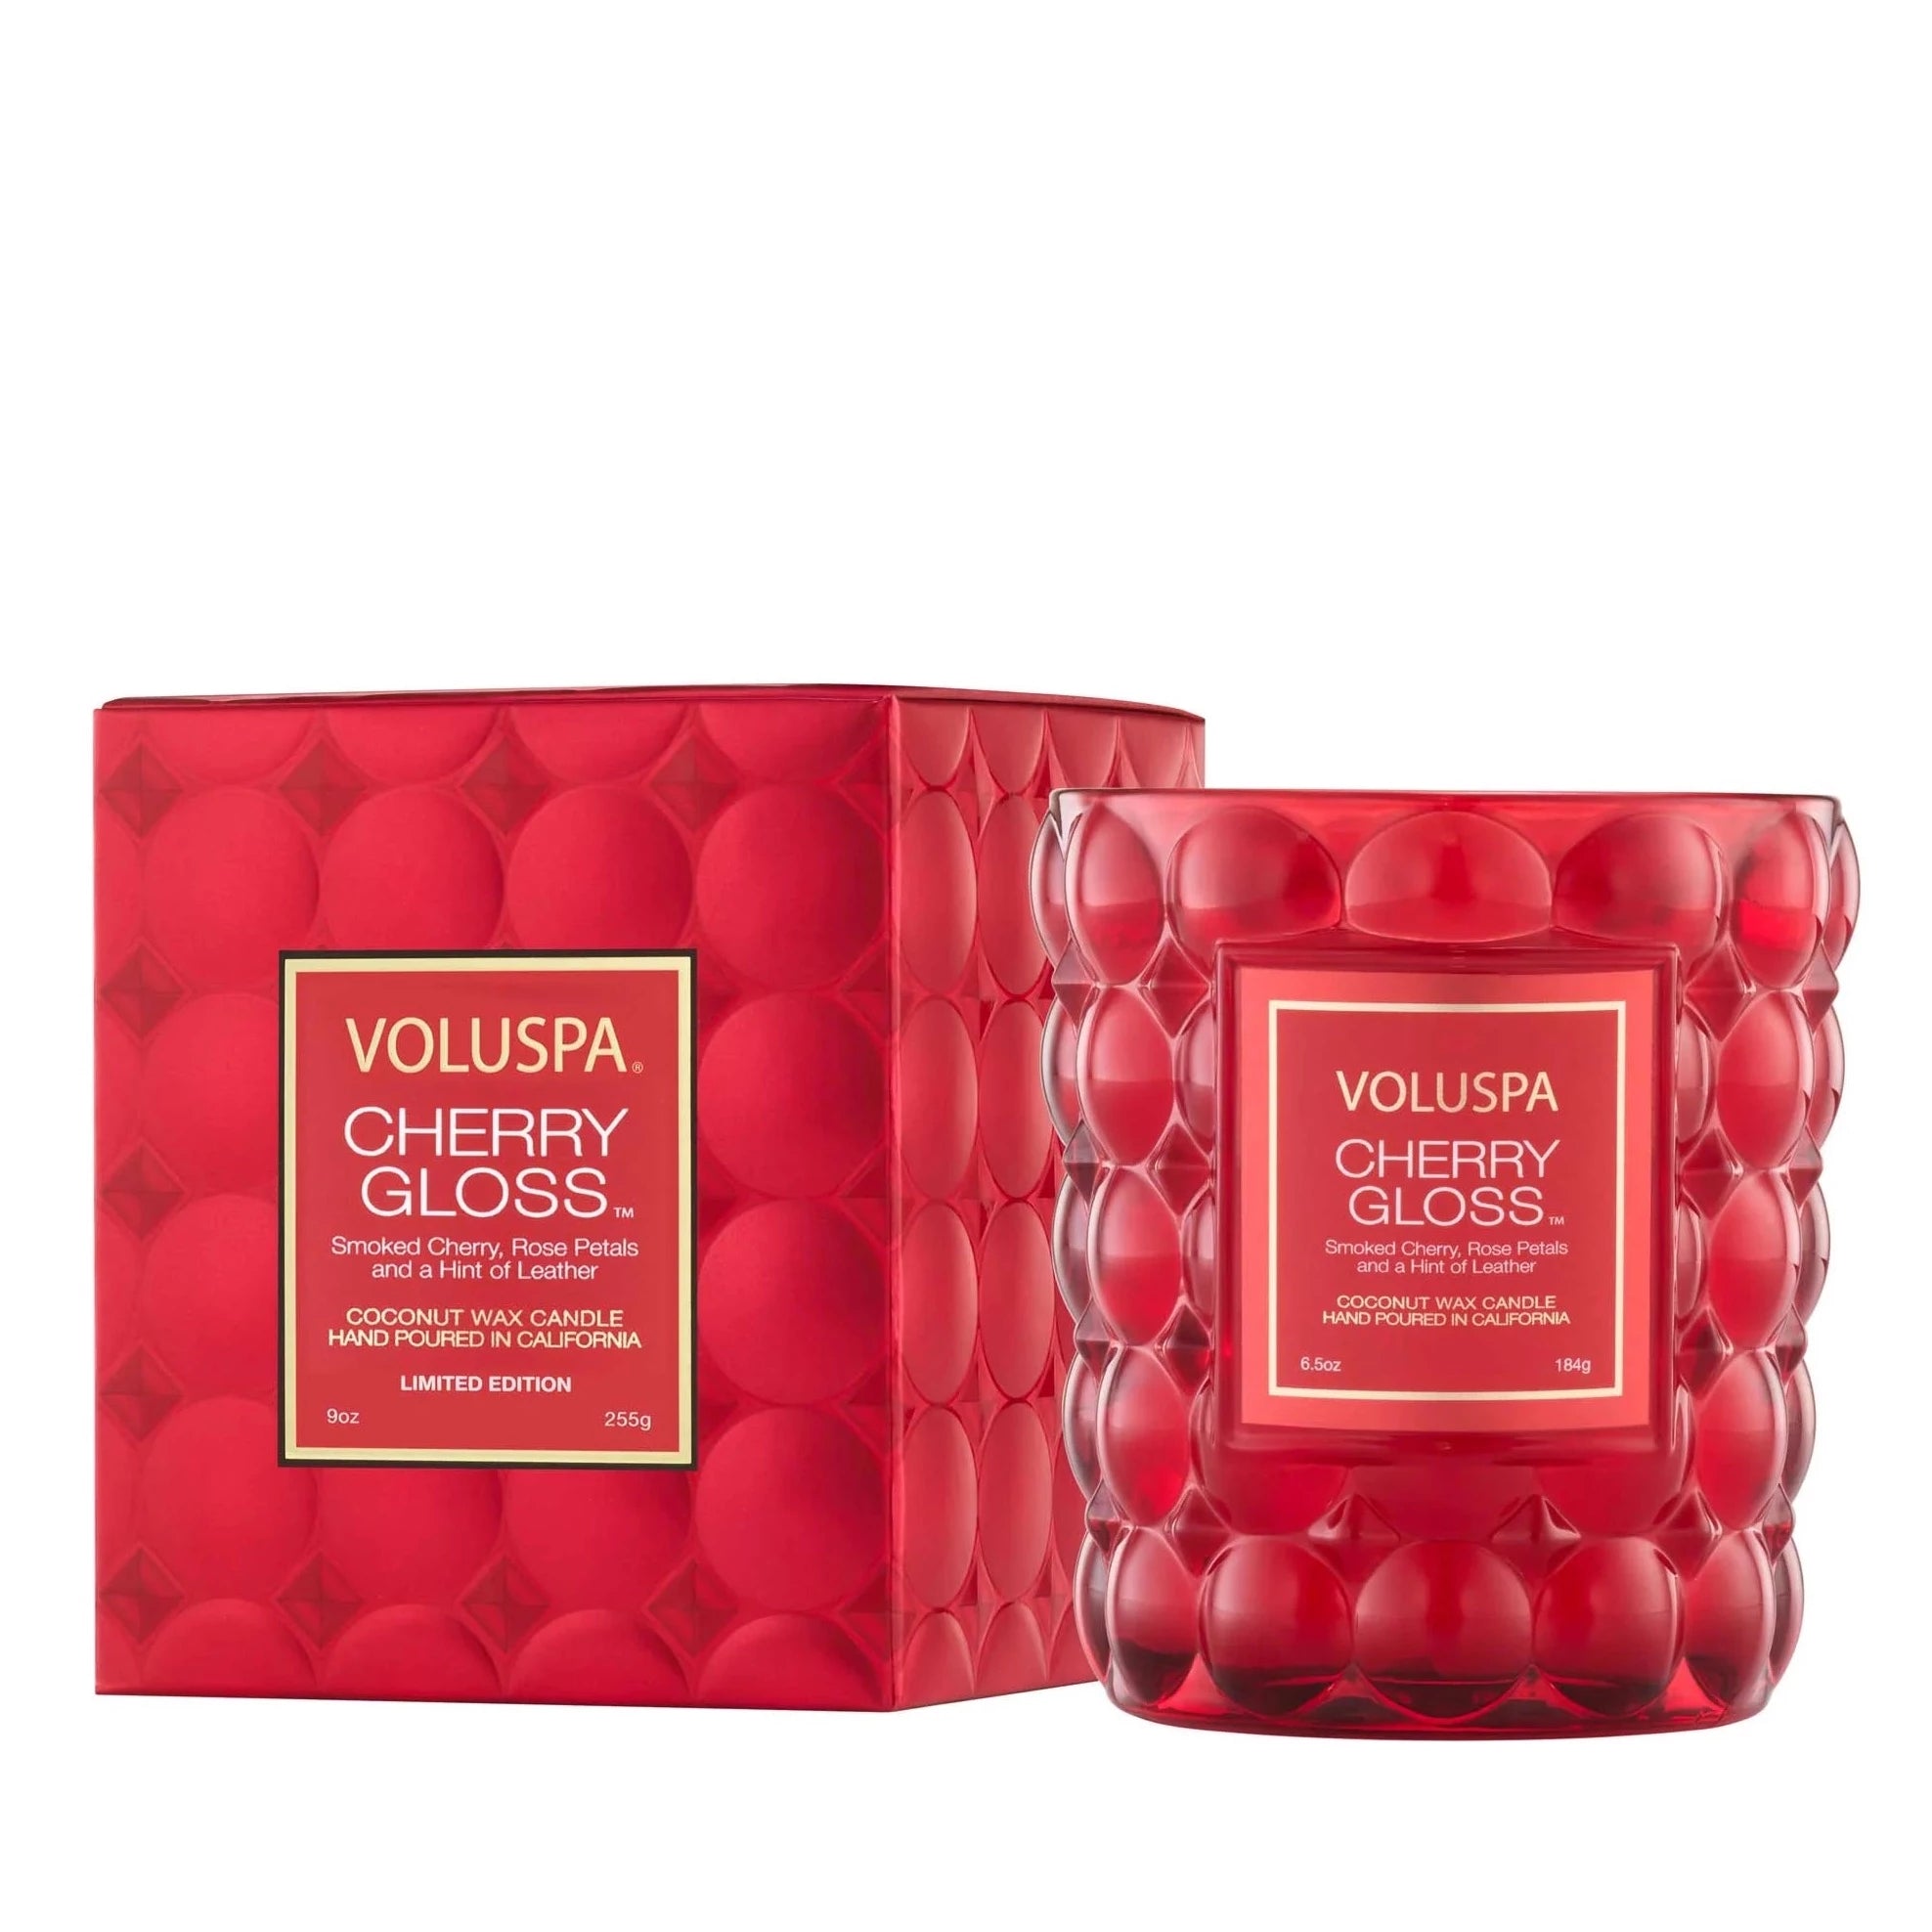 Red box with red bubbly candle next to it. Candle has white text